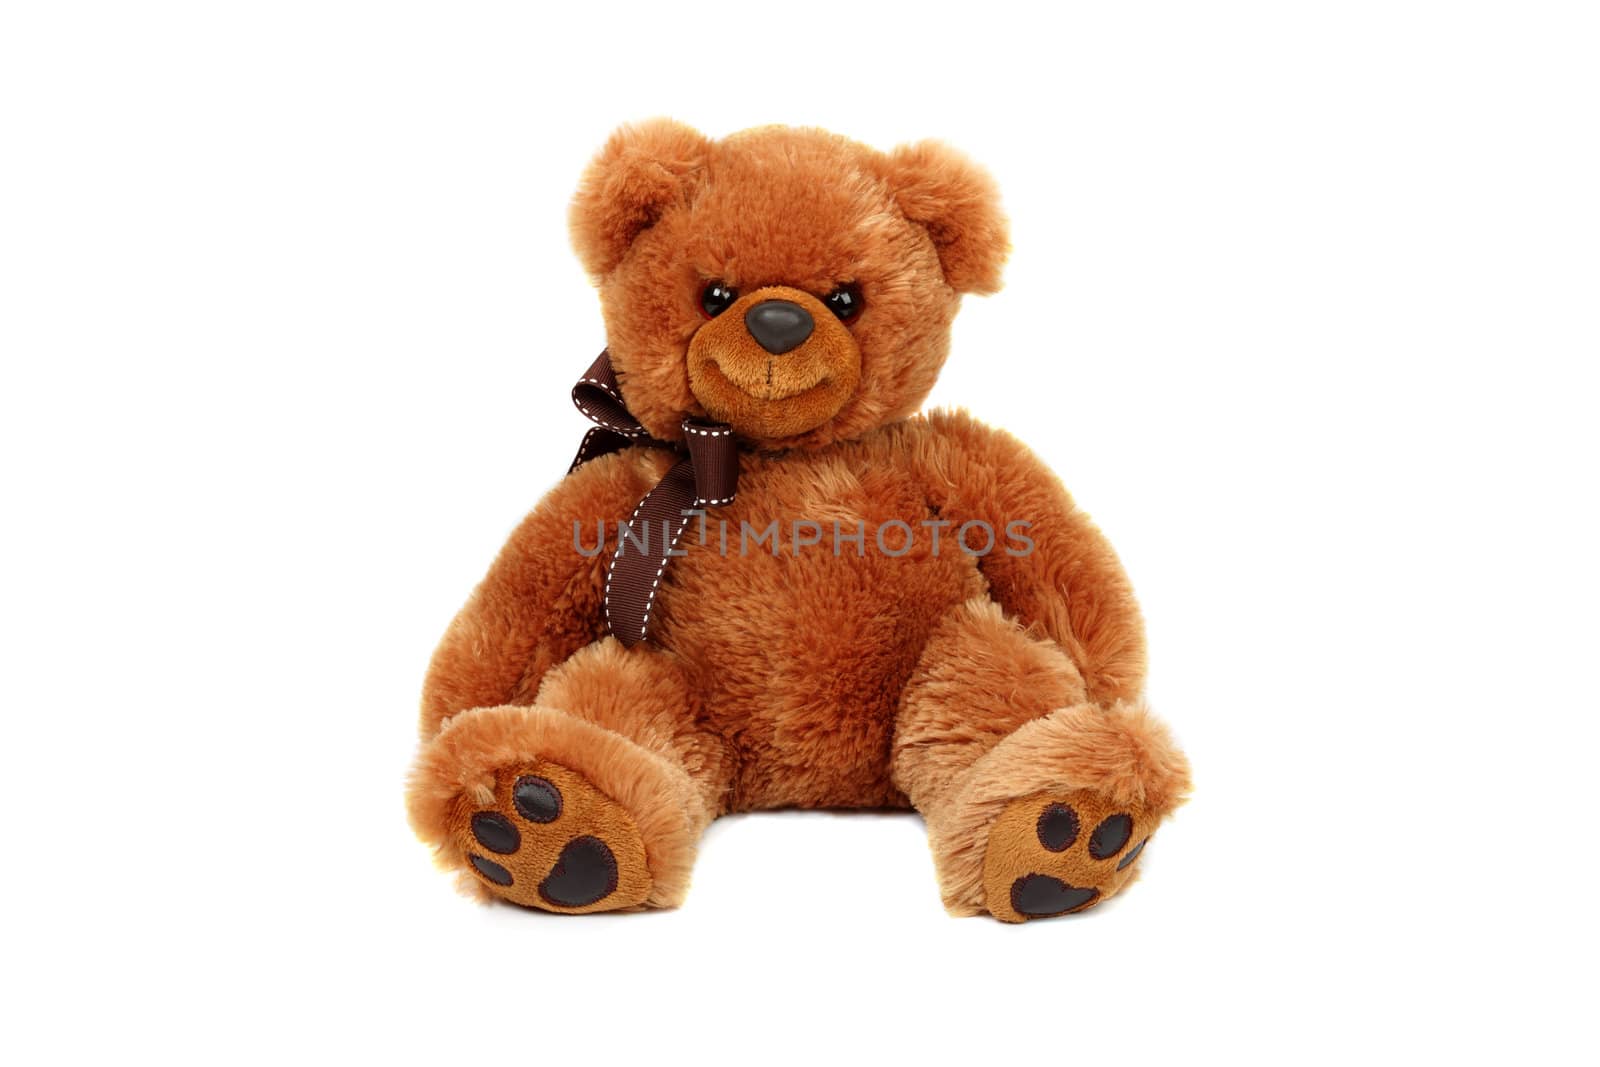 Horizontal studio shot of brown bear toy isolated on white background.